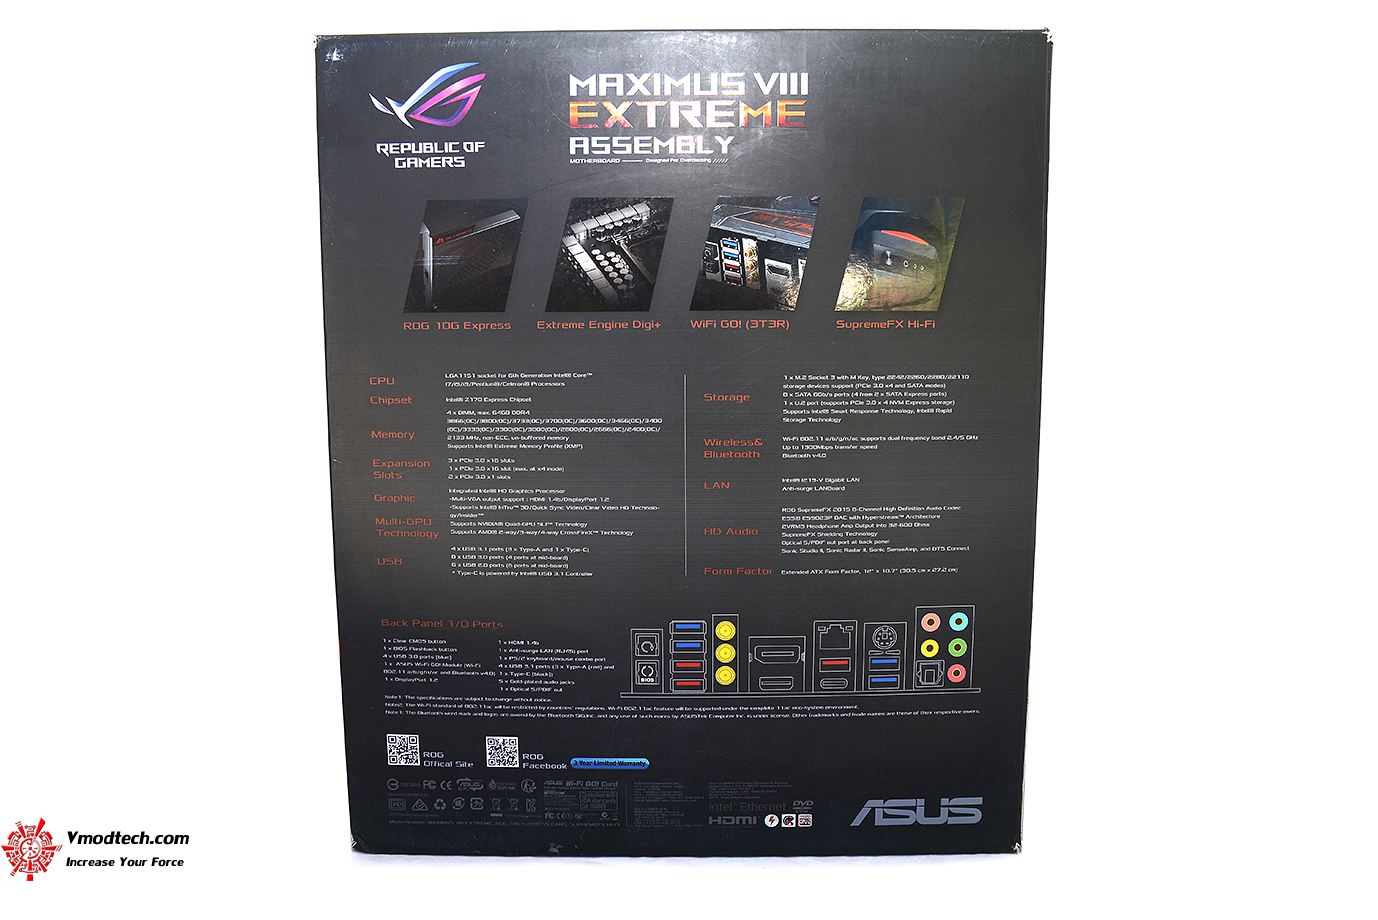 1 ASUS ROG MAXIMUS VIII EXTREME/ASSEMBLY REVIEW